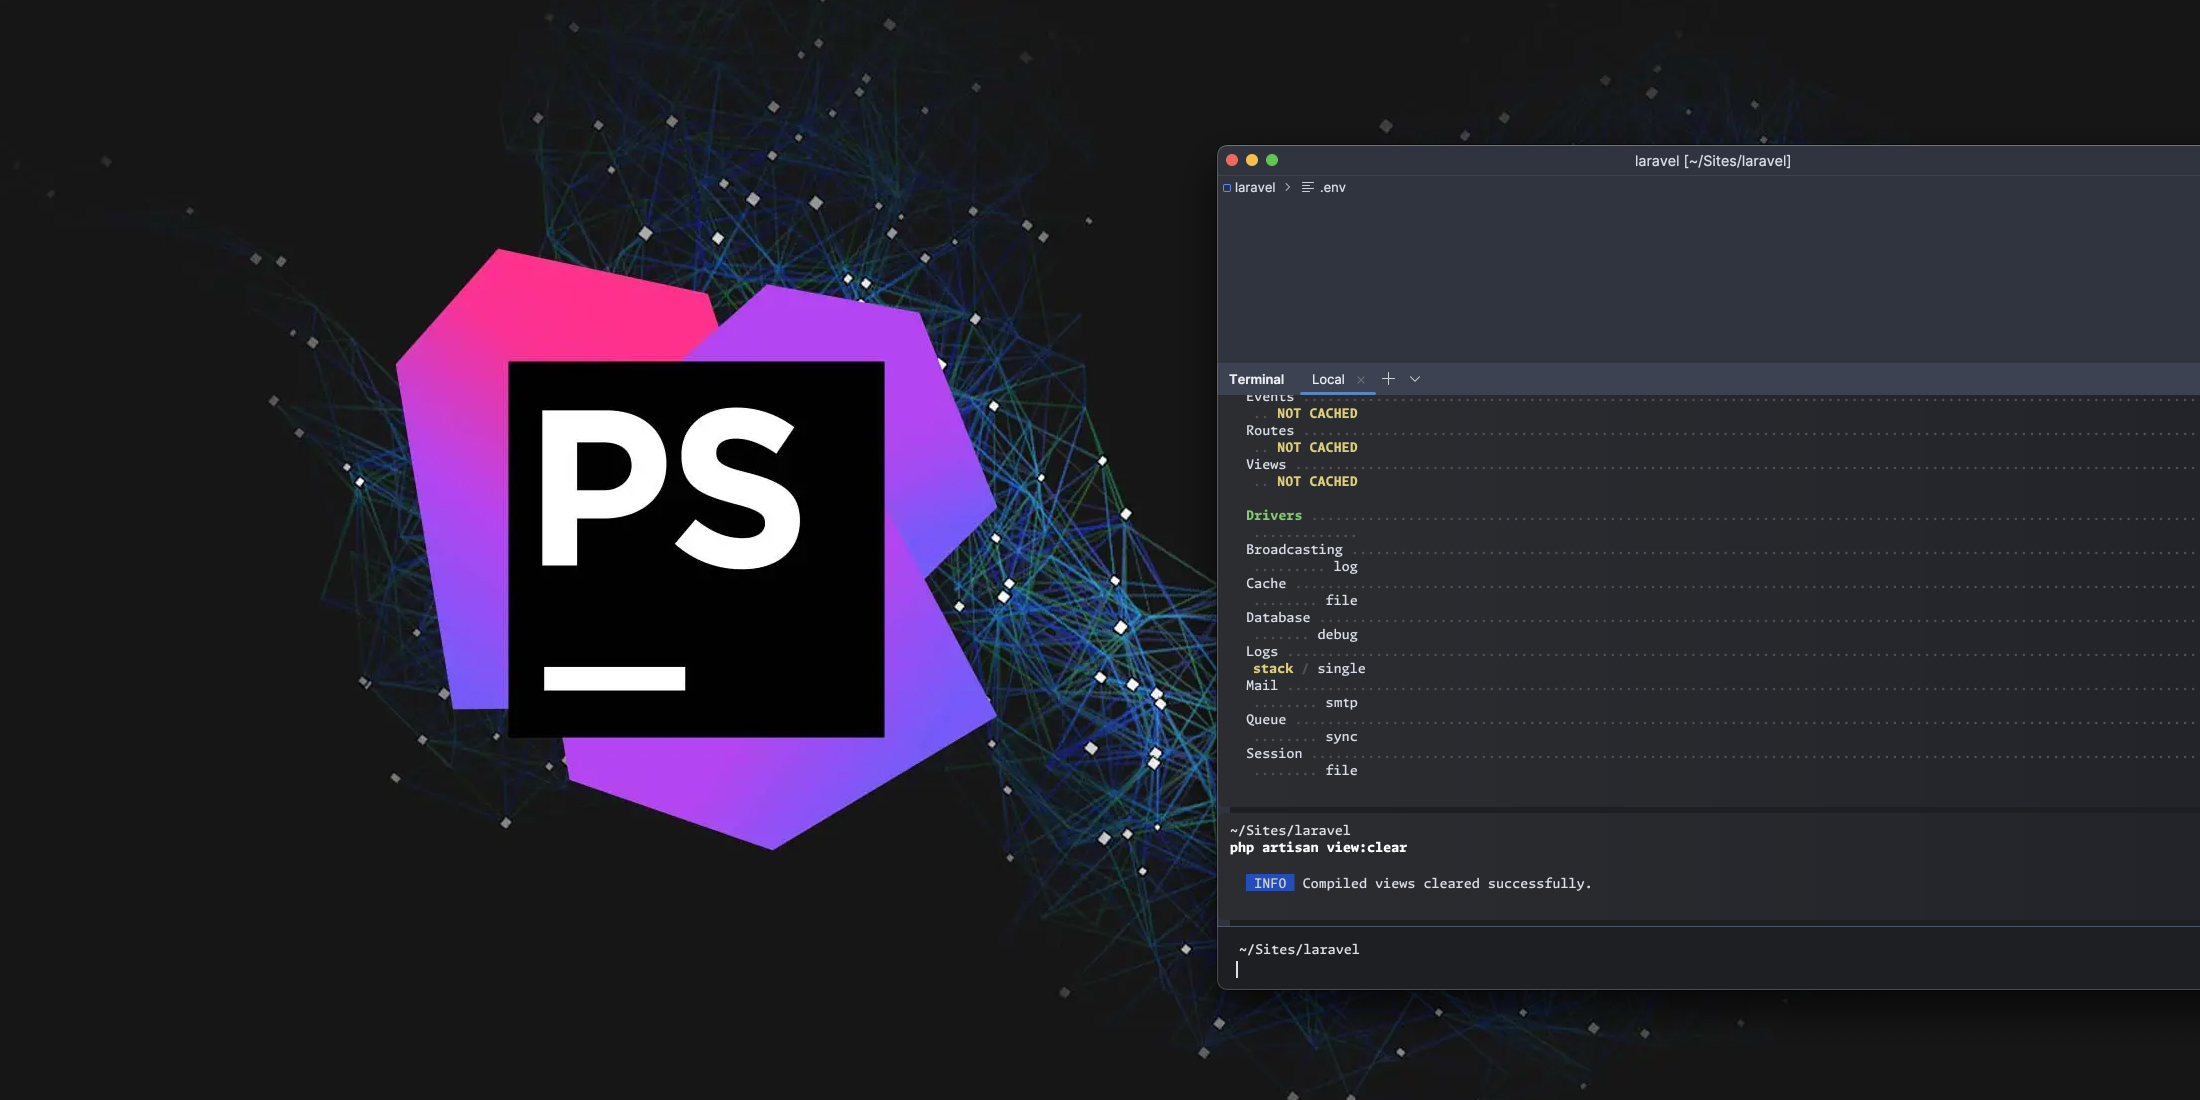 PhpStorm is getting a brand new terminal image